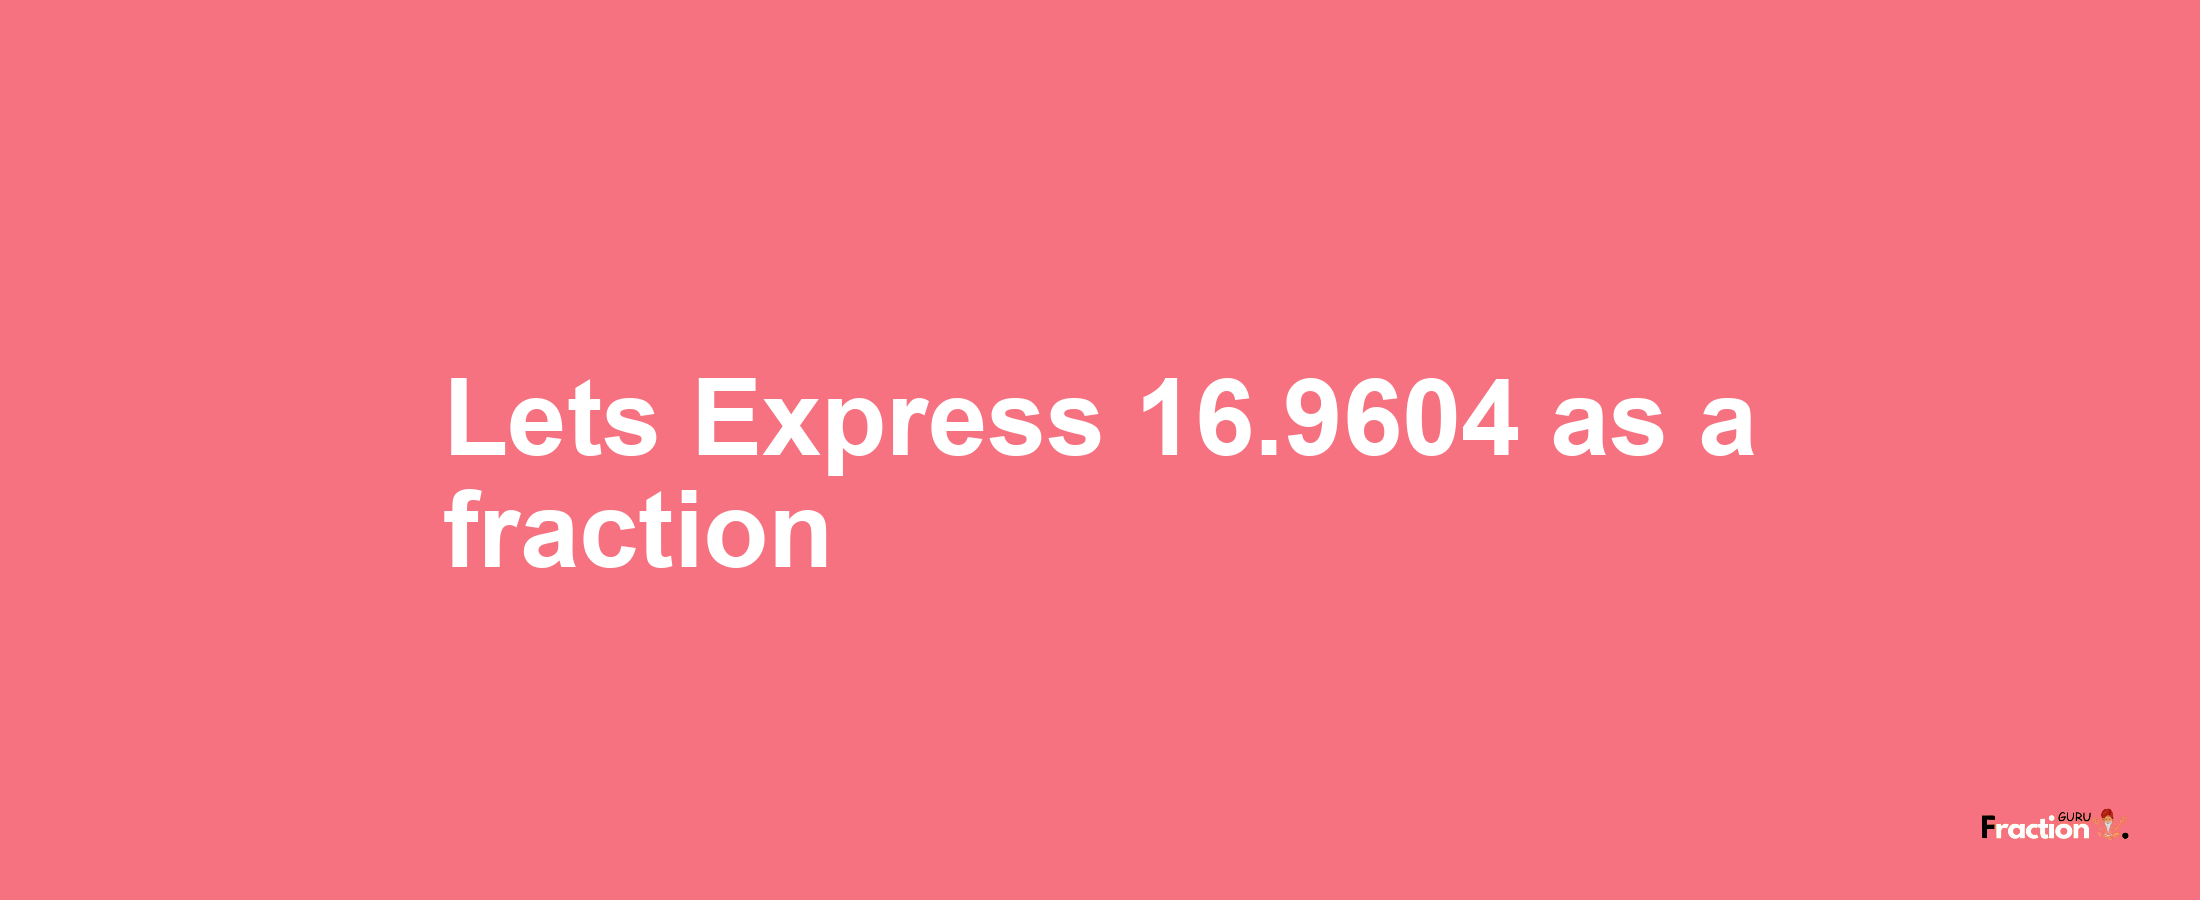 Lets Express 16.9604 as afraction